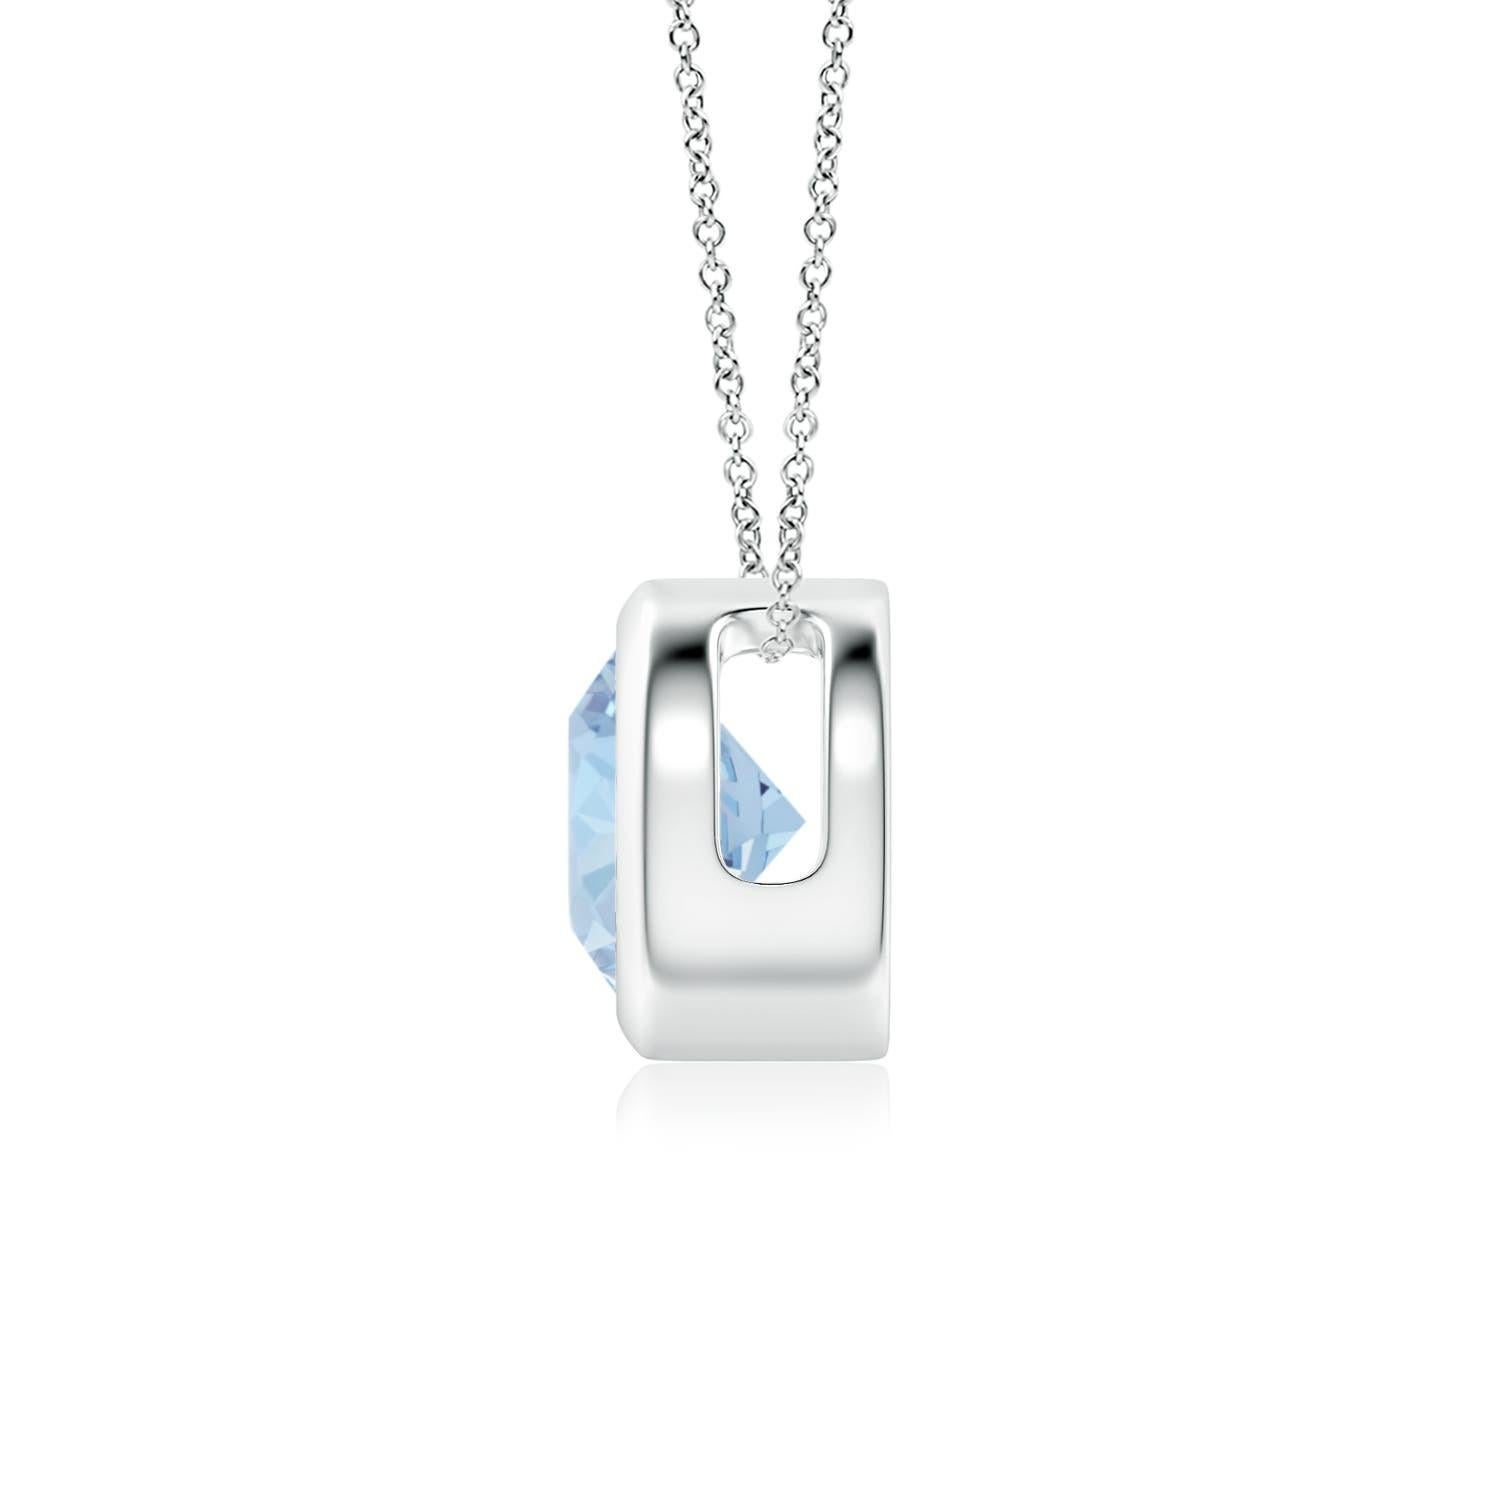 This classic solitaire aquamarine pendant's beautiful design makes the center stone appear like it's floating on the chain. The radiant sea blue aquamarine is secured in a bezel setting. Crafted in platinum, this round aquamarine pendant is simple